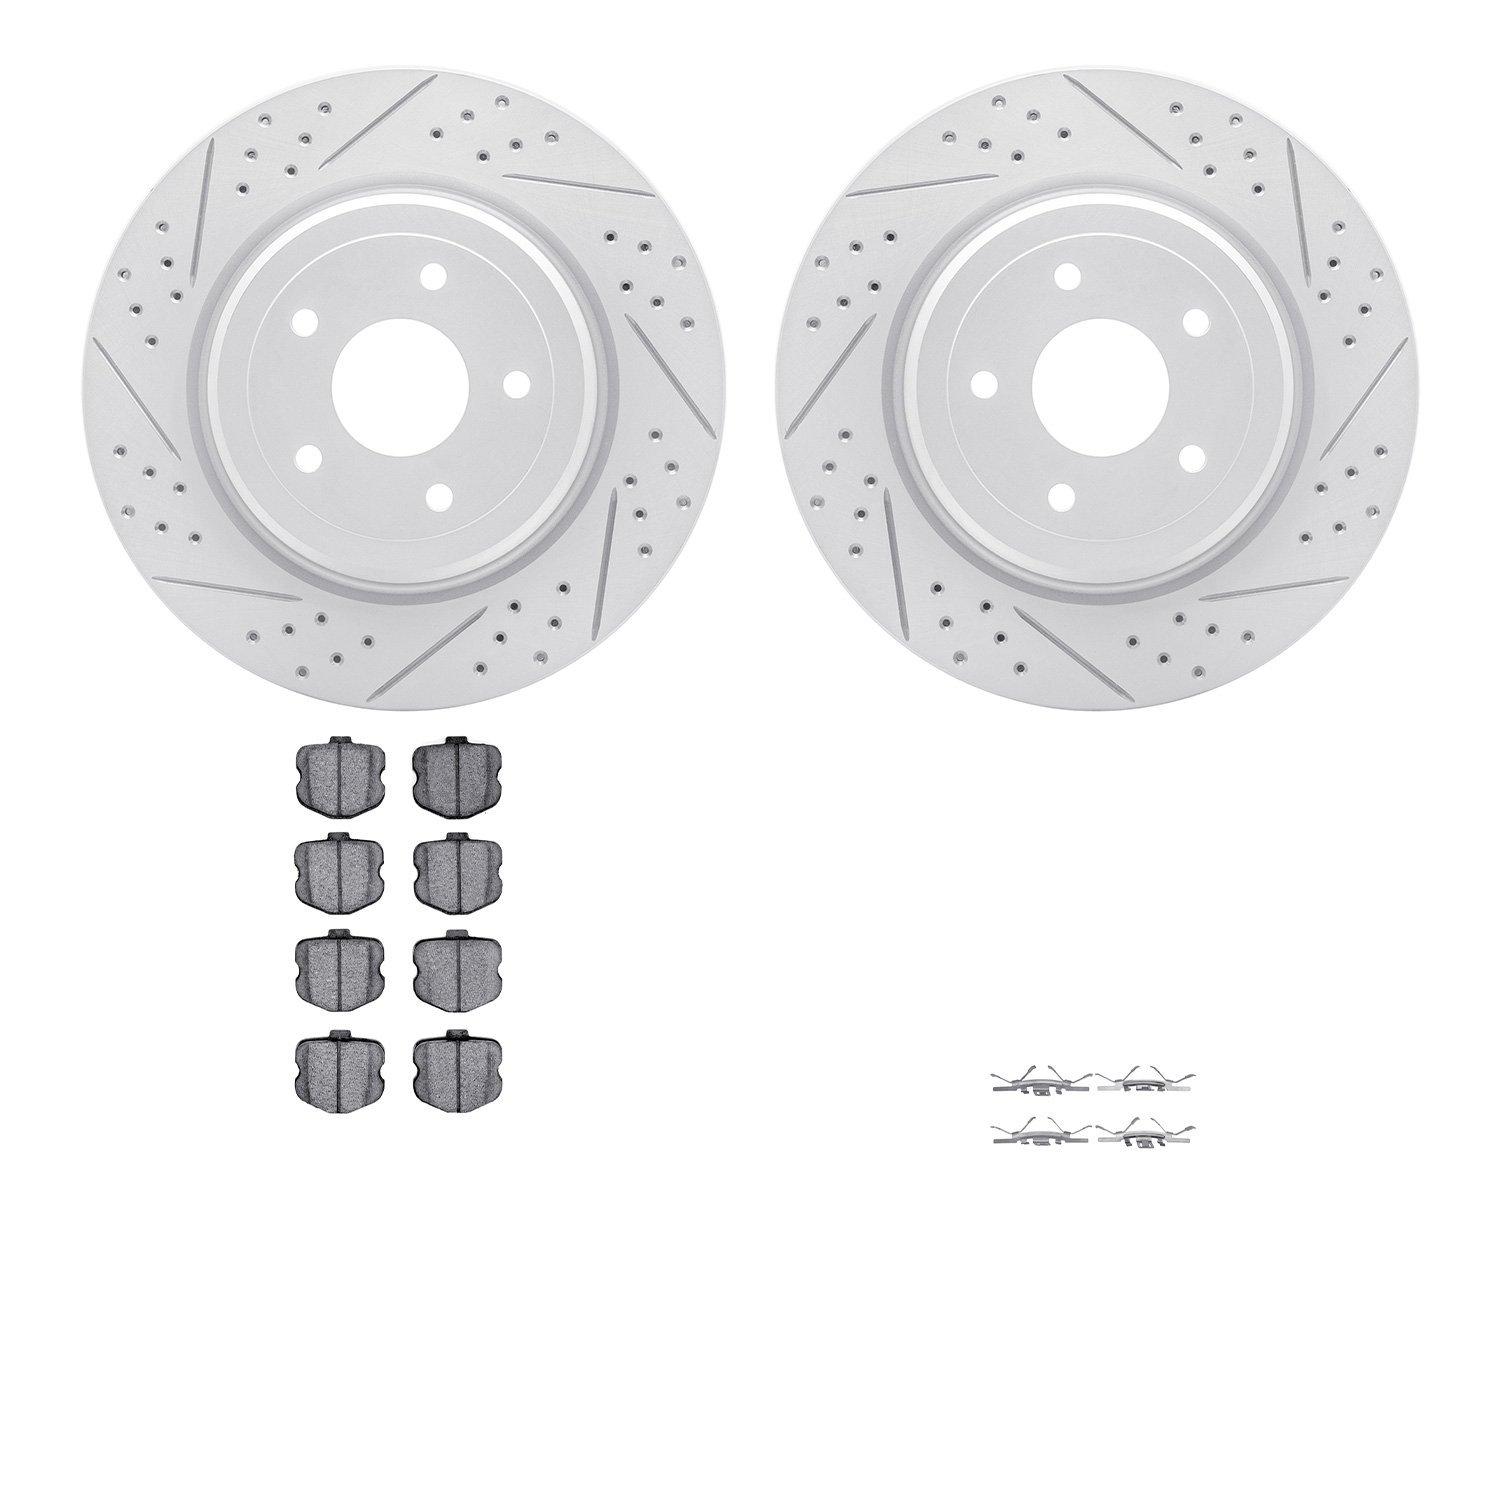 2512-47015 Geoperformance Drilled/Slotted Rotors w/5000 Advanced Brake Pads Kit & Hardware, 2006-2013 GM, Position: Rear